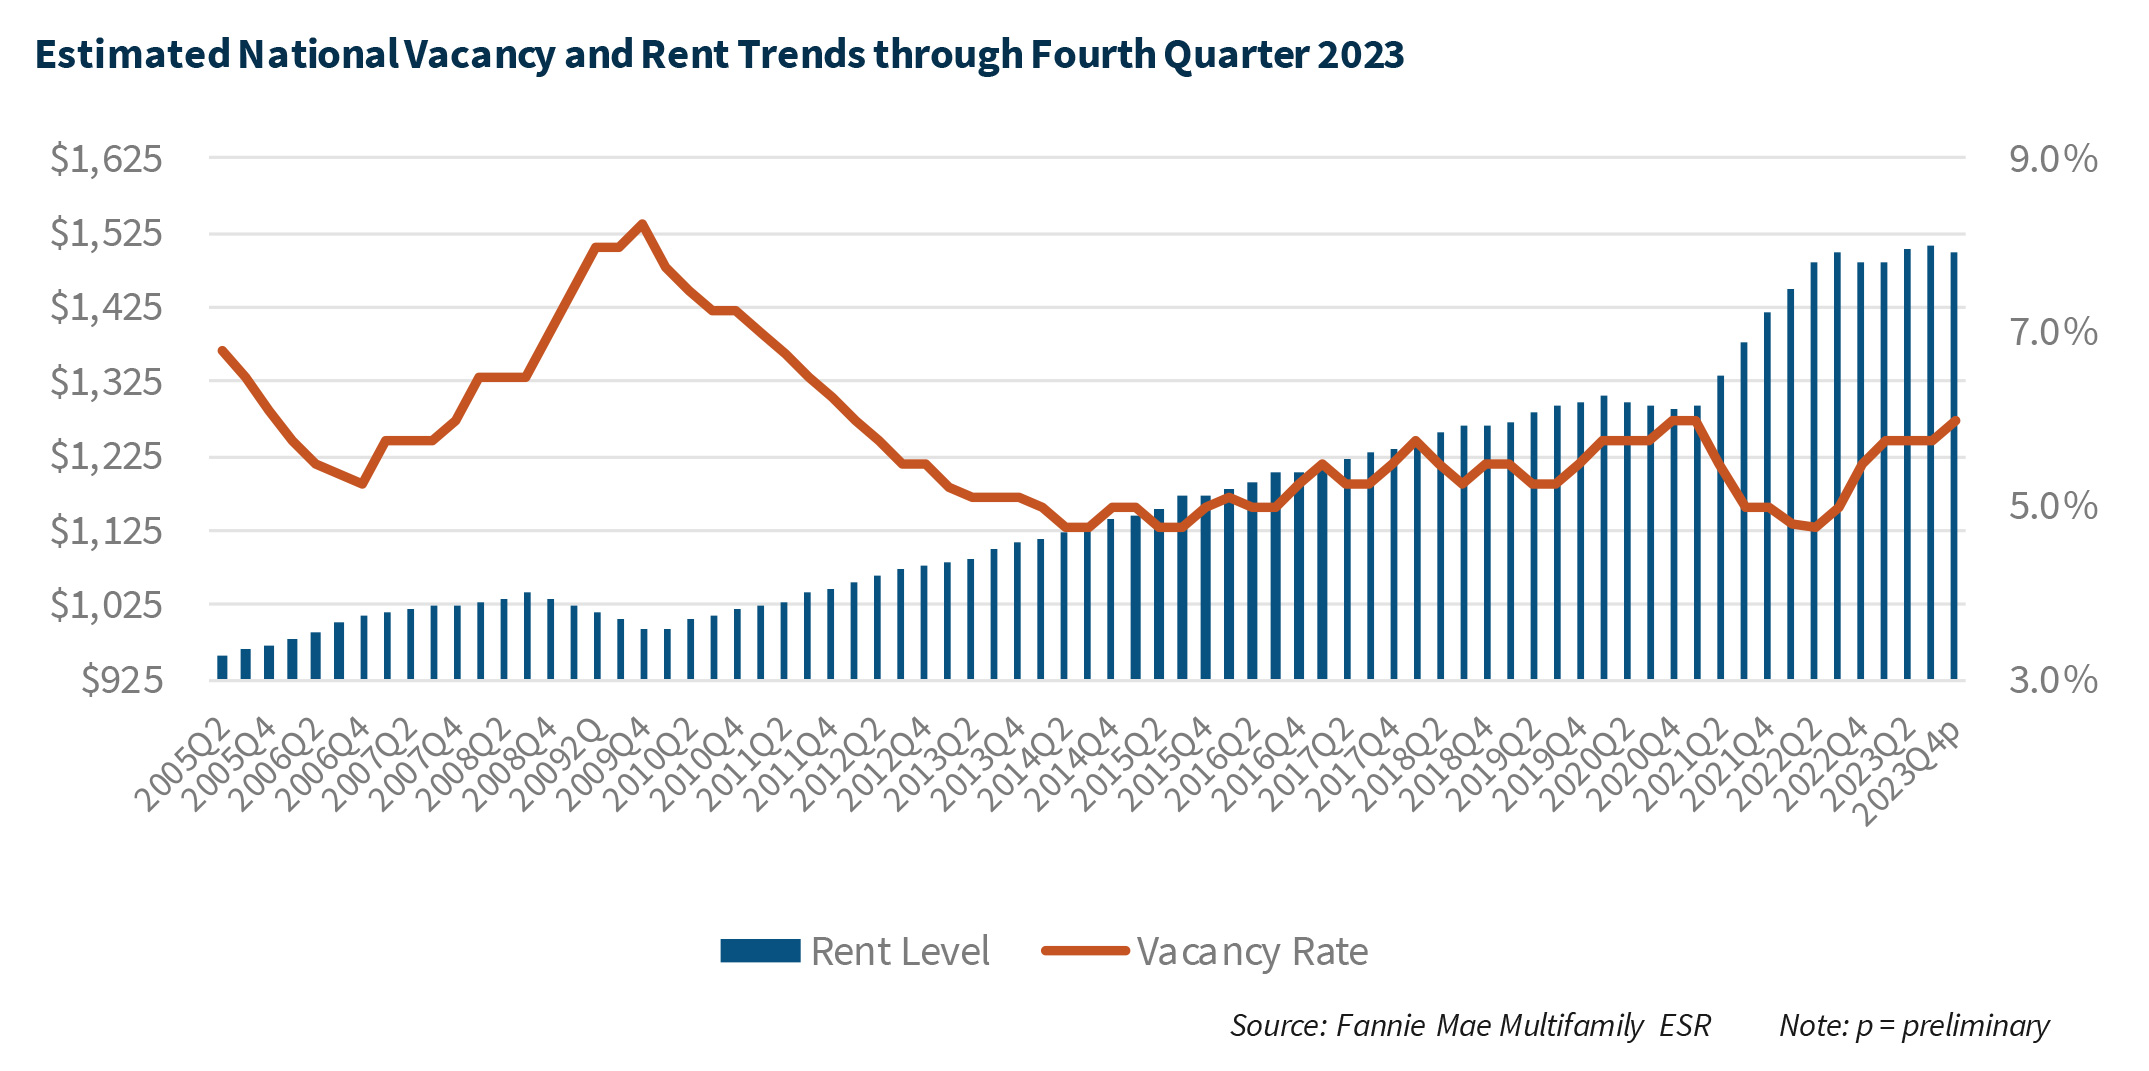 Estimated National Vacancy and Rent Trends through Fourth Quarter 2023